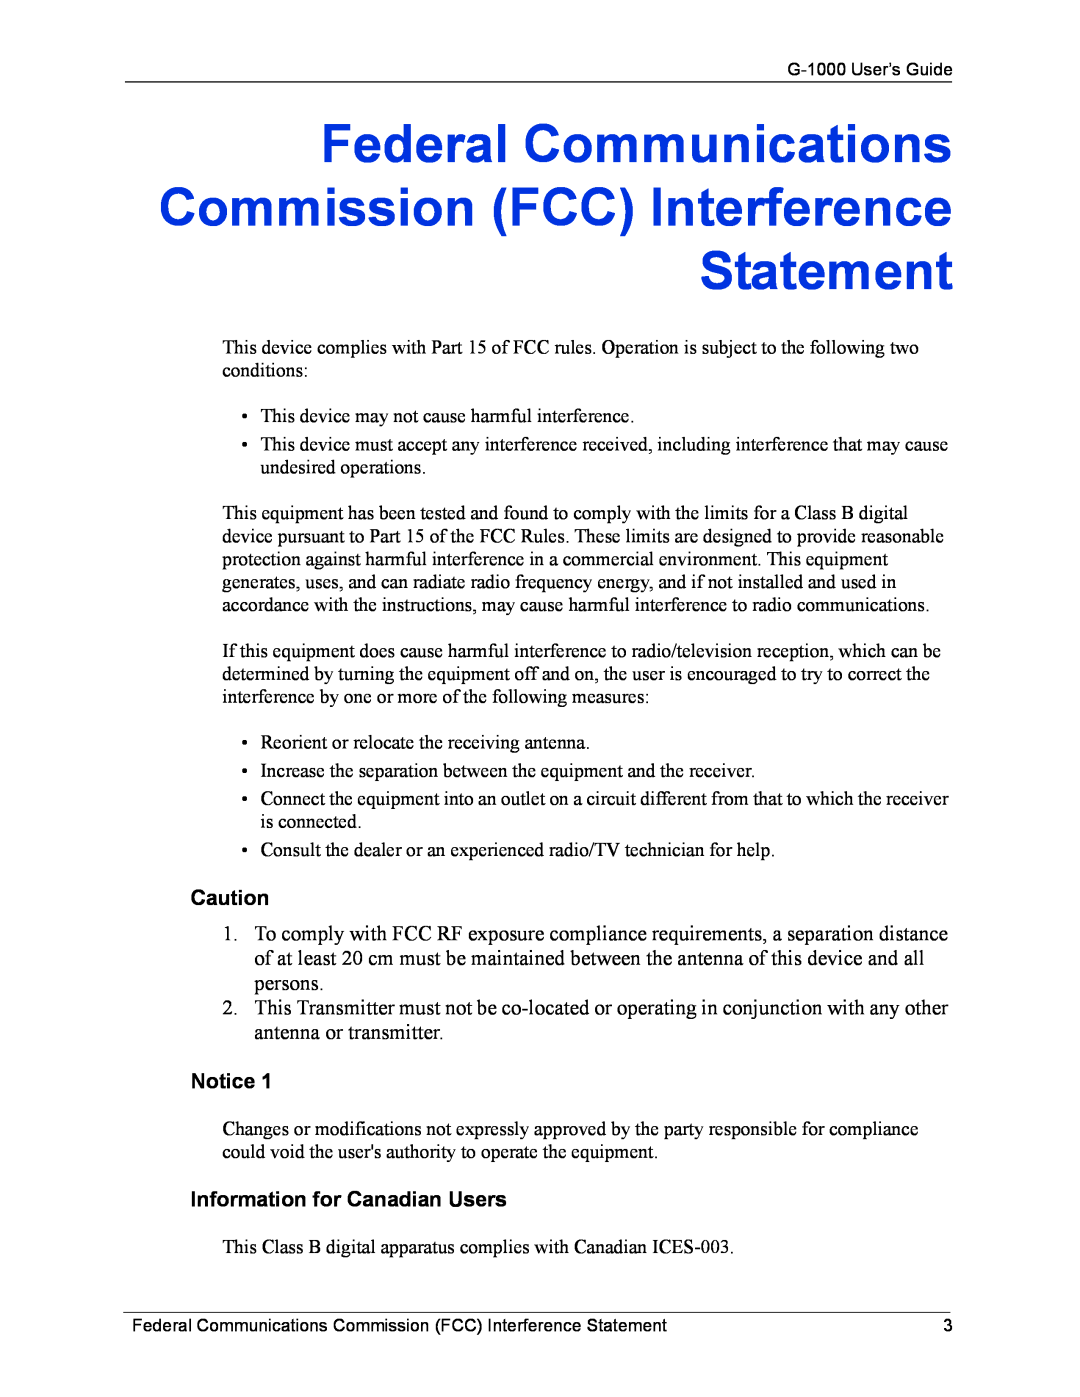 ZyXEL Communications G-1000 Federal Communications Commission FCC Interference Statement, Information for Canadian Users 